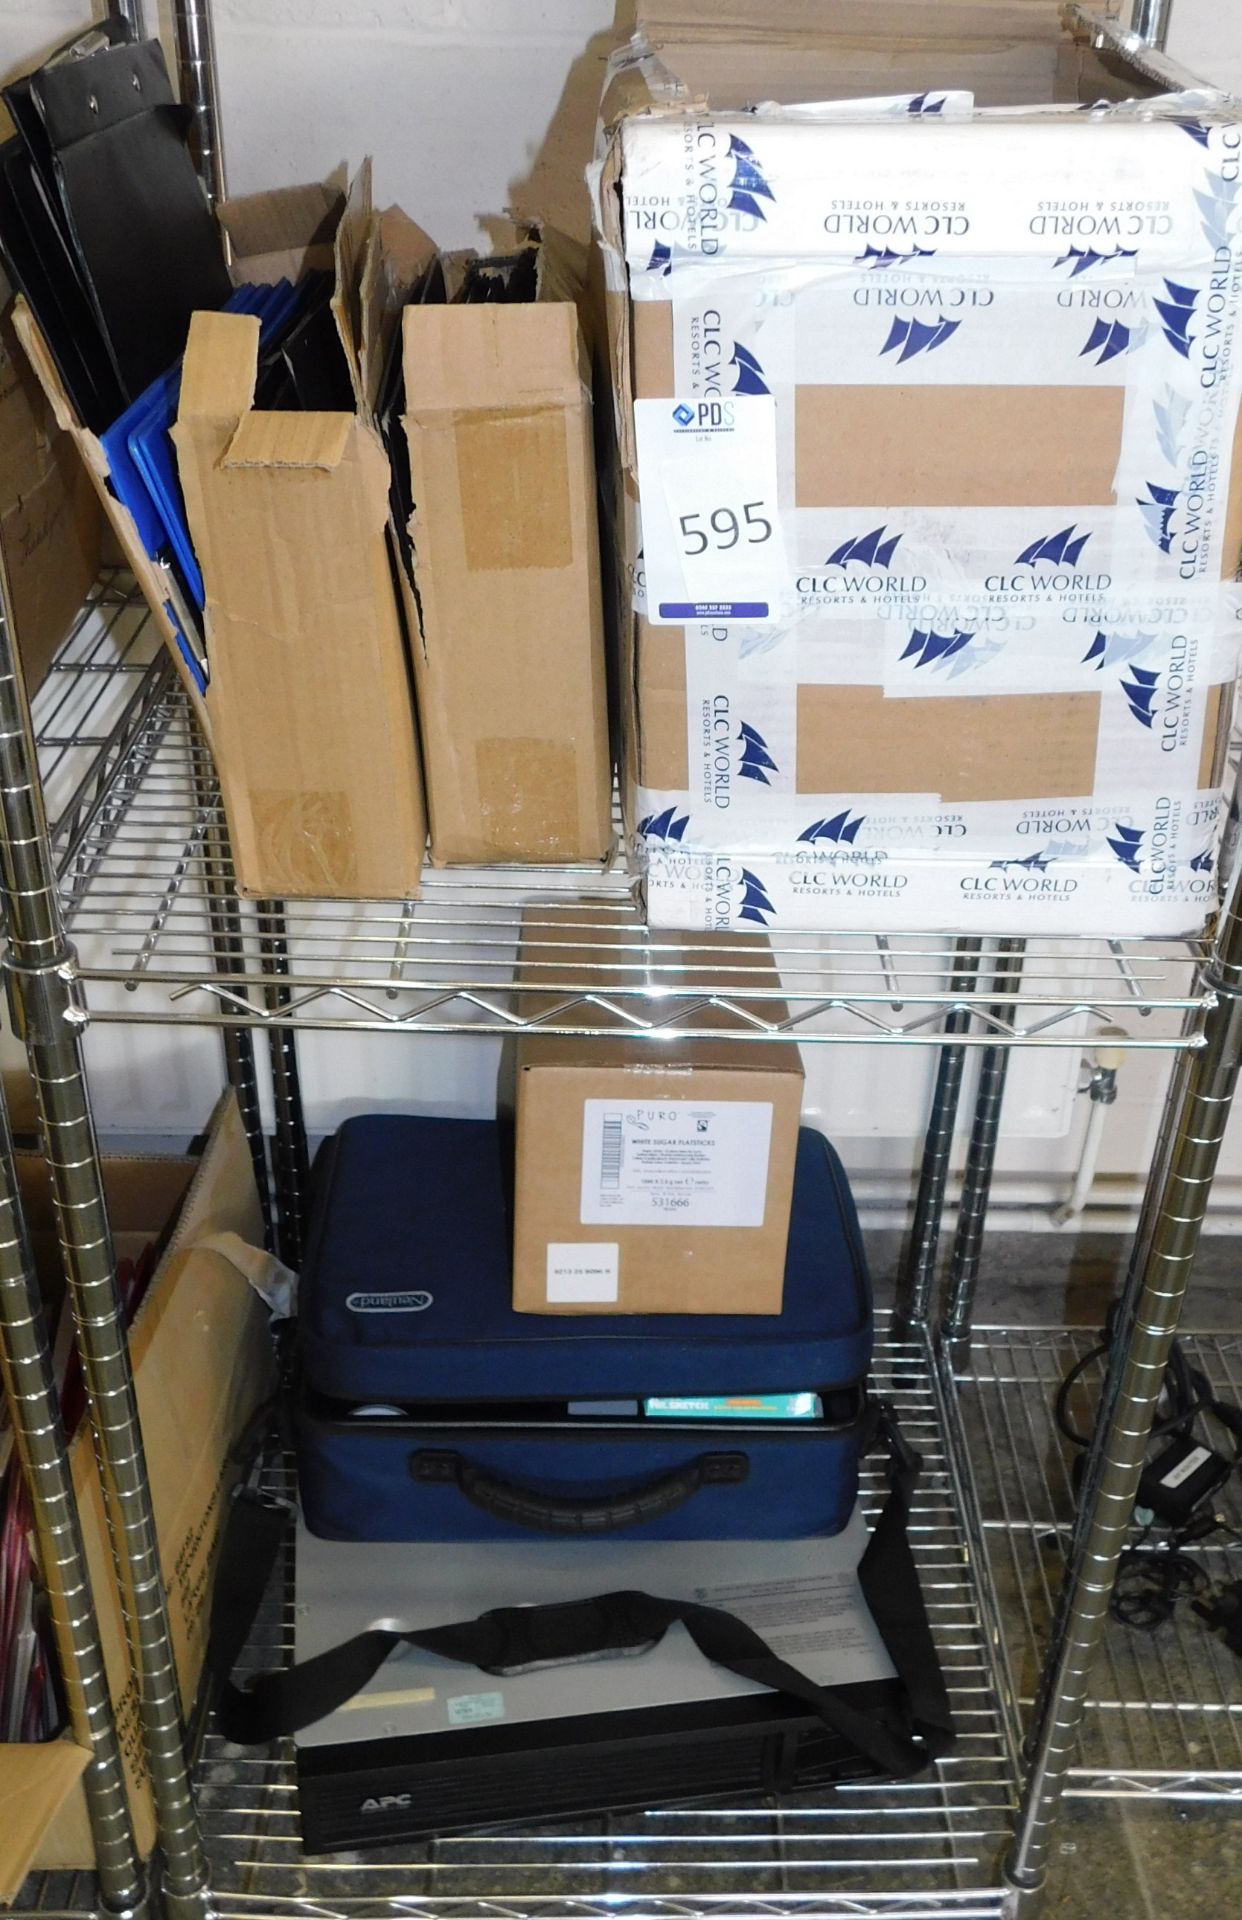 2 Shelves to Include APC Smart-UPS C1500 & Quantity of Stationery Items (Located Stockport - See